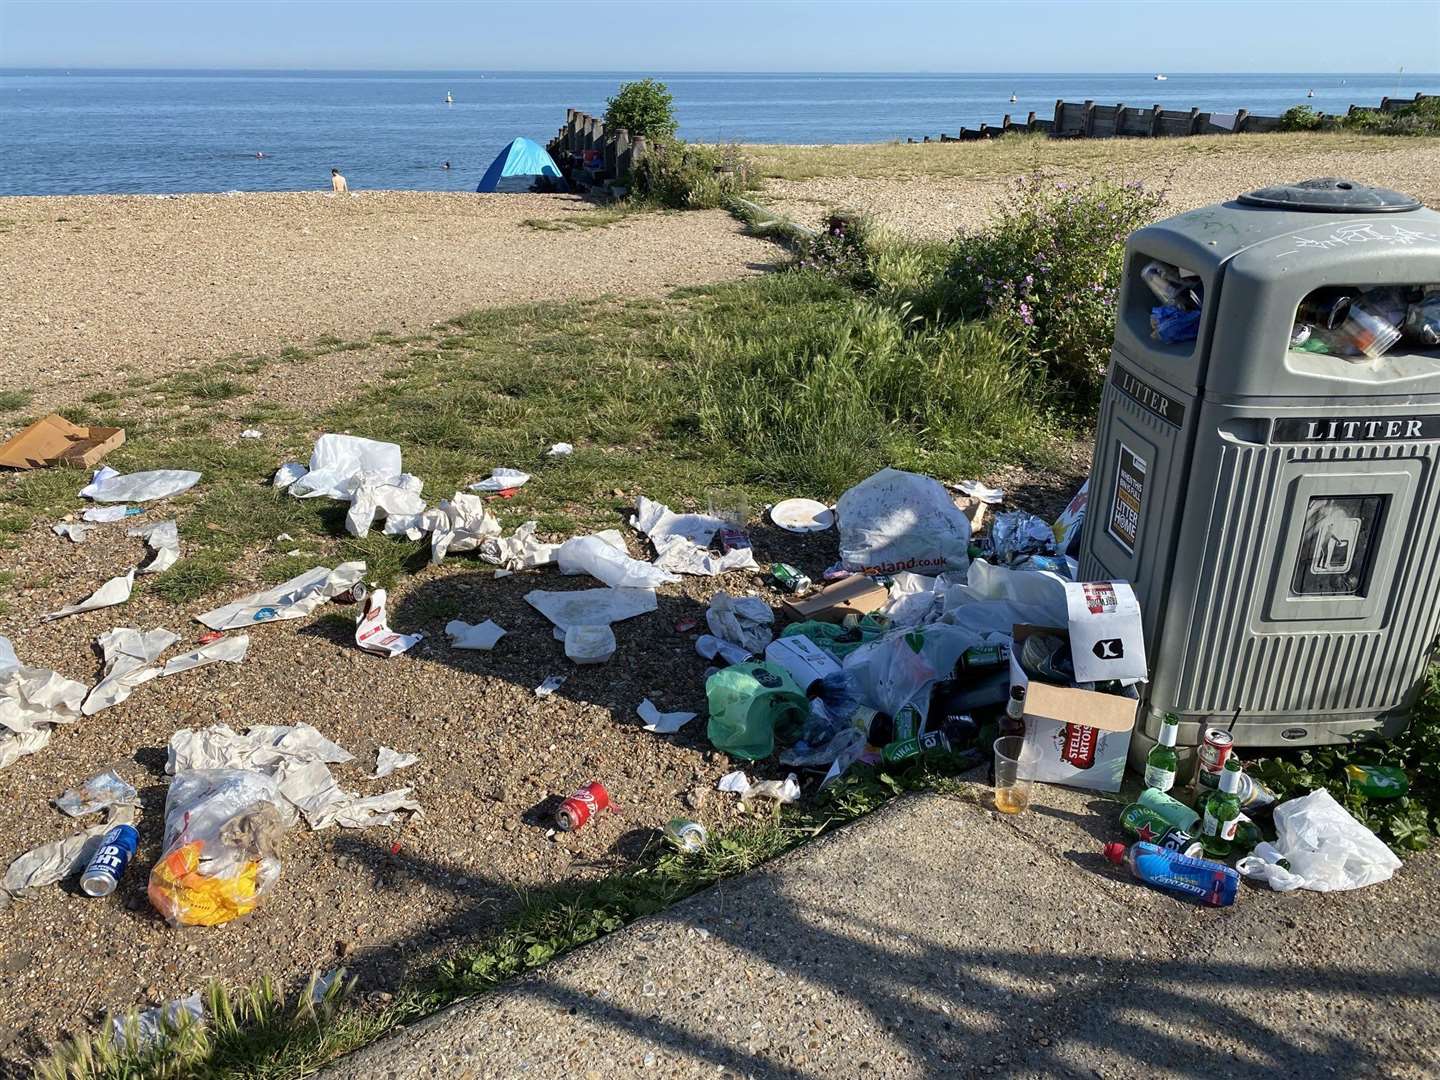 Rubbish at Whitstable beach. Picture: Twitter / @candy43759291